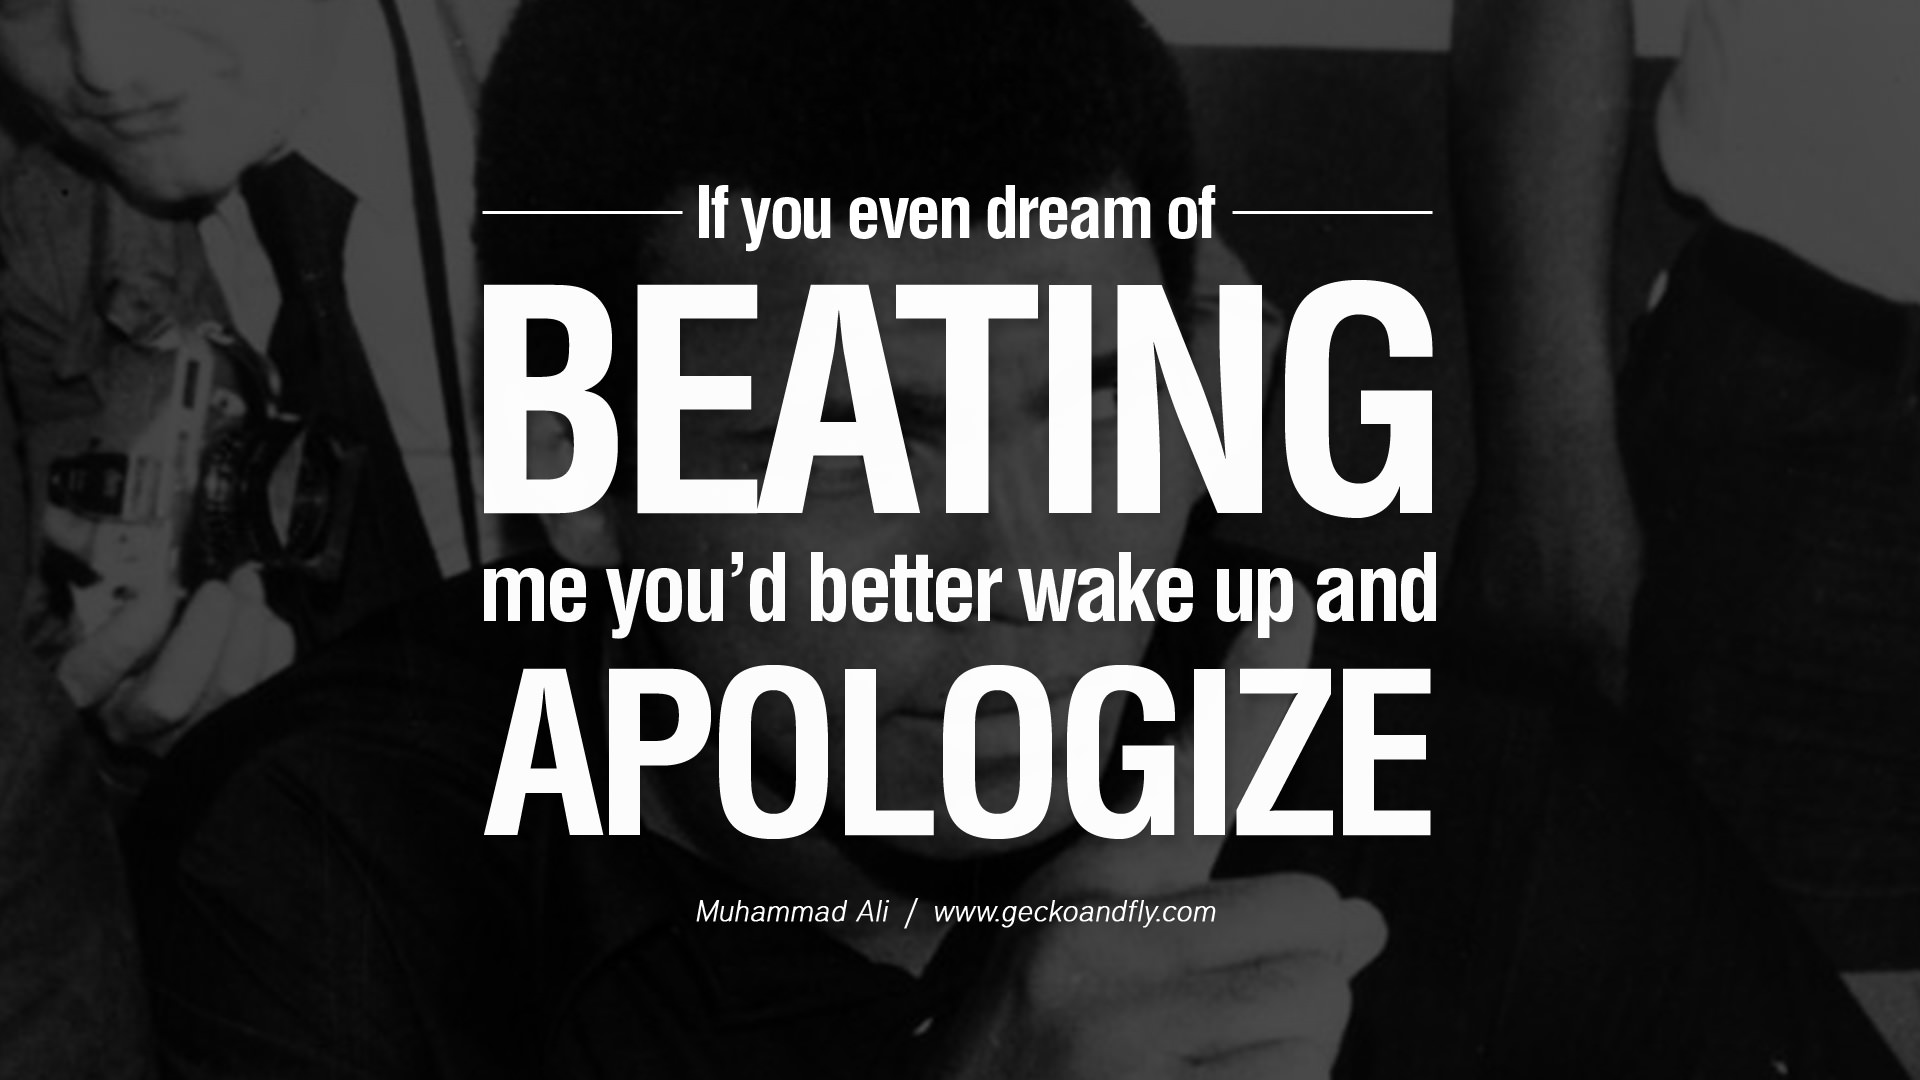 If you even dream of beating me you'd better wake up and apologize muhammad ali quote